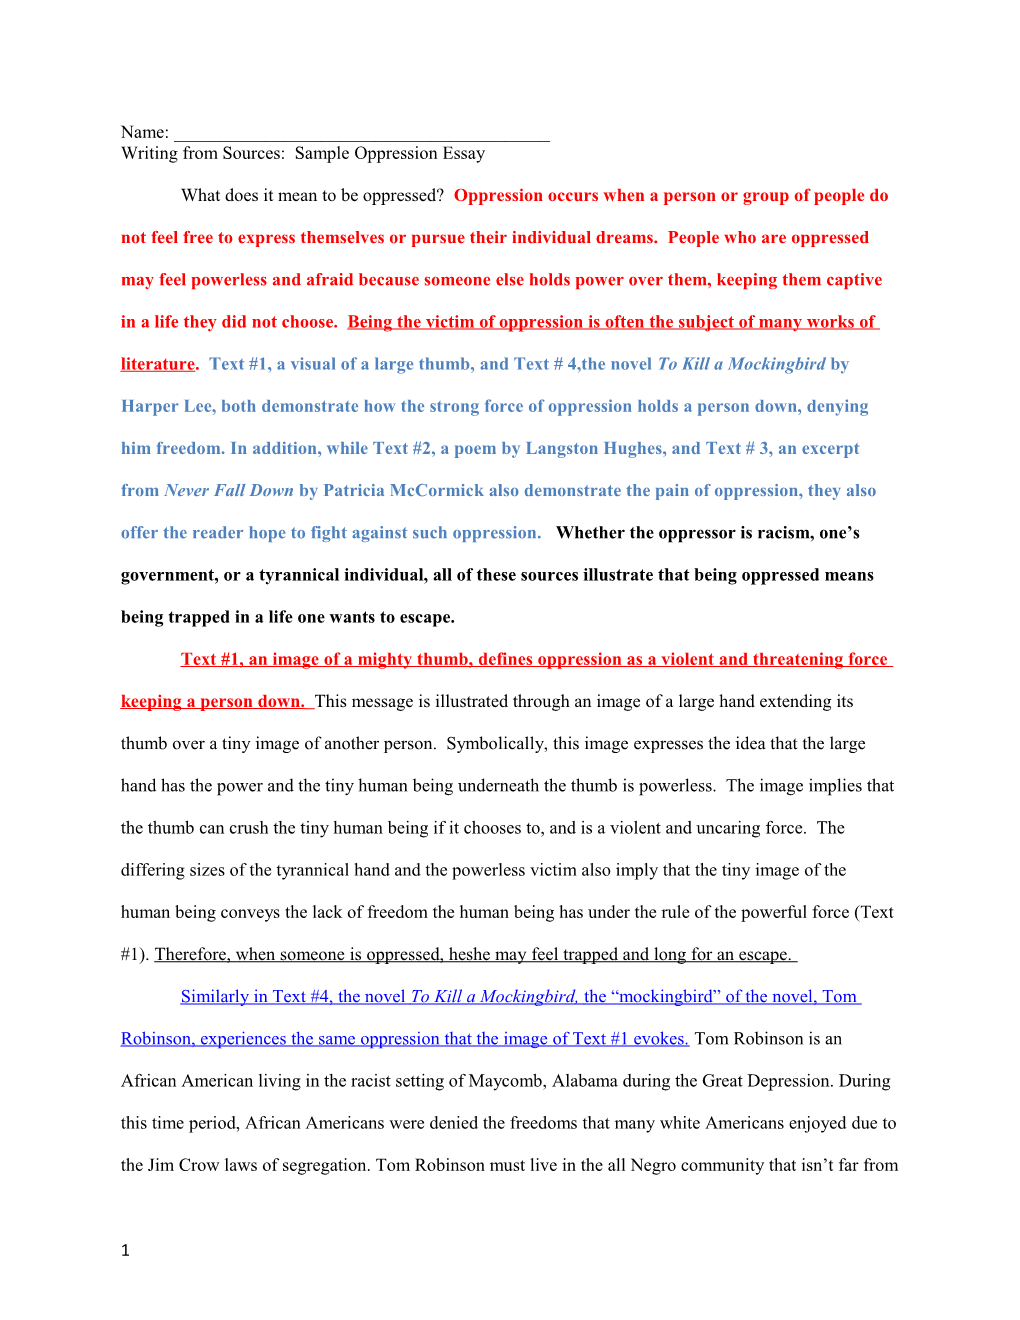 Writing from Sources: Sample Oppression Essay